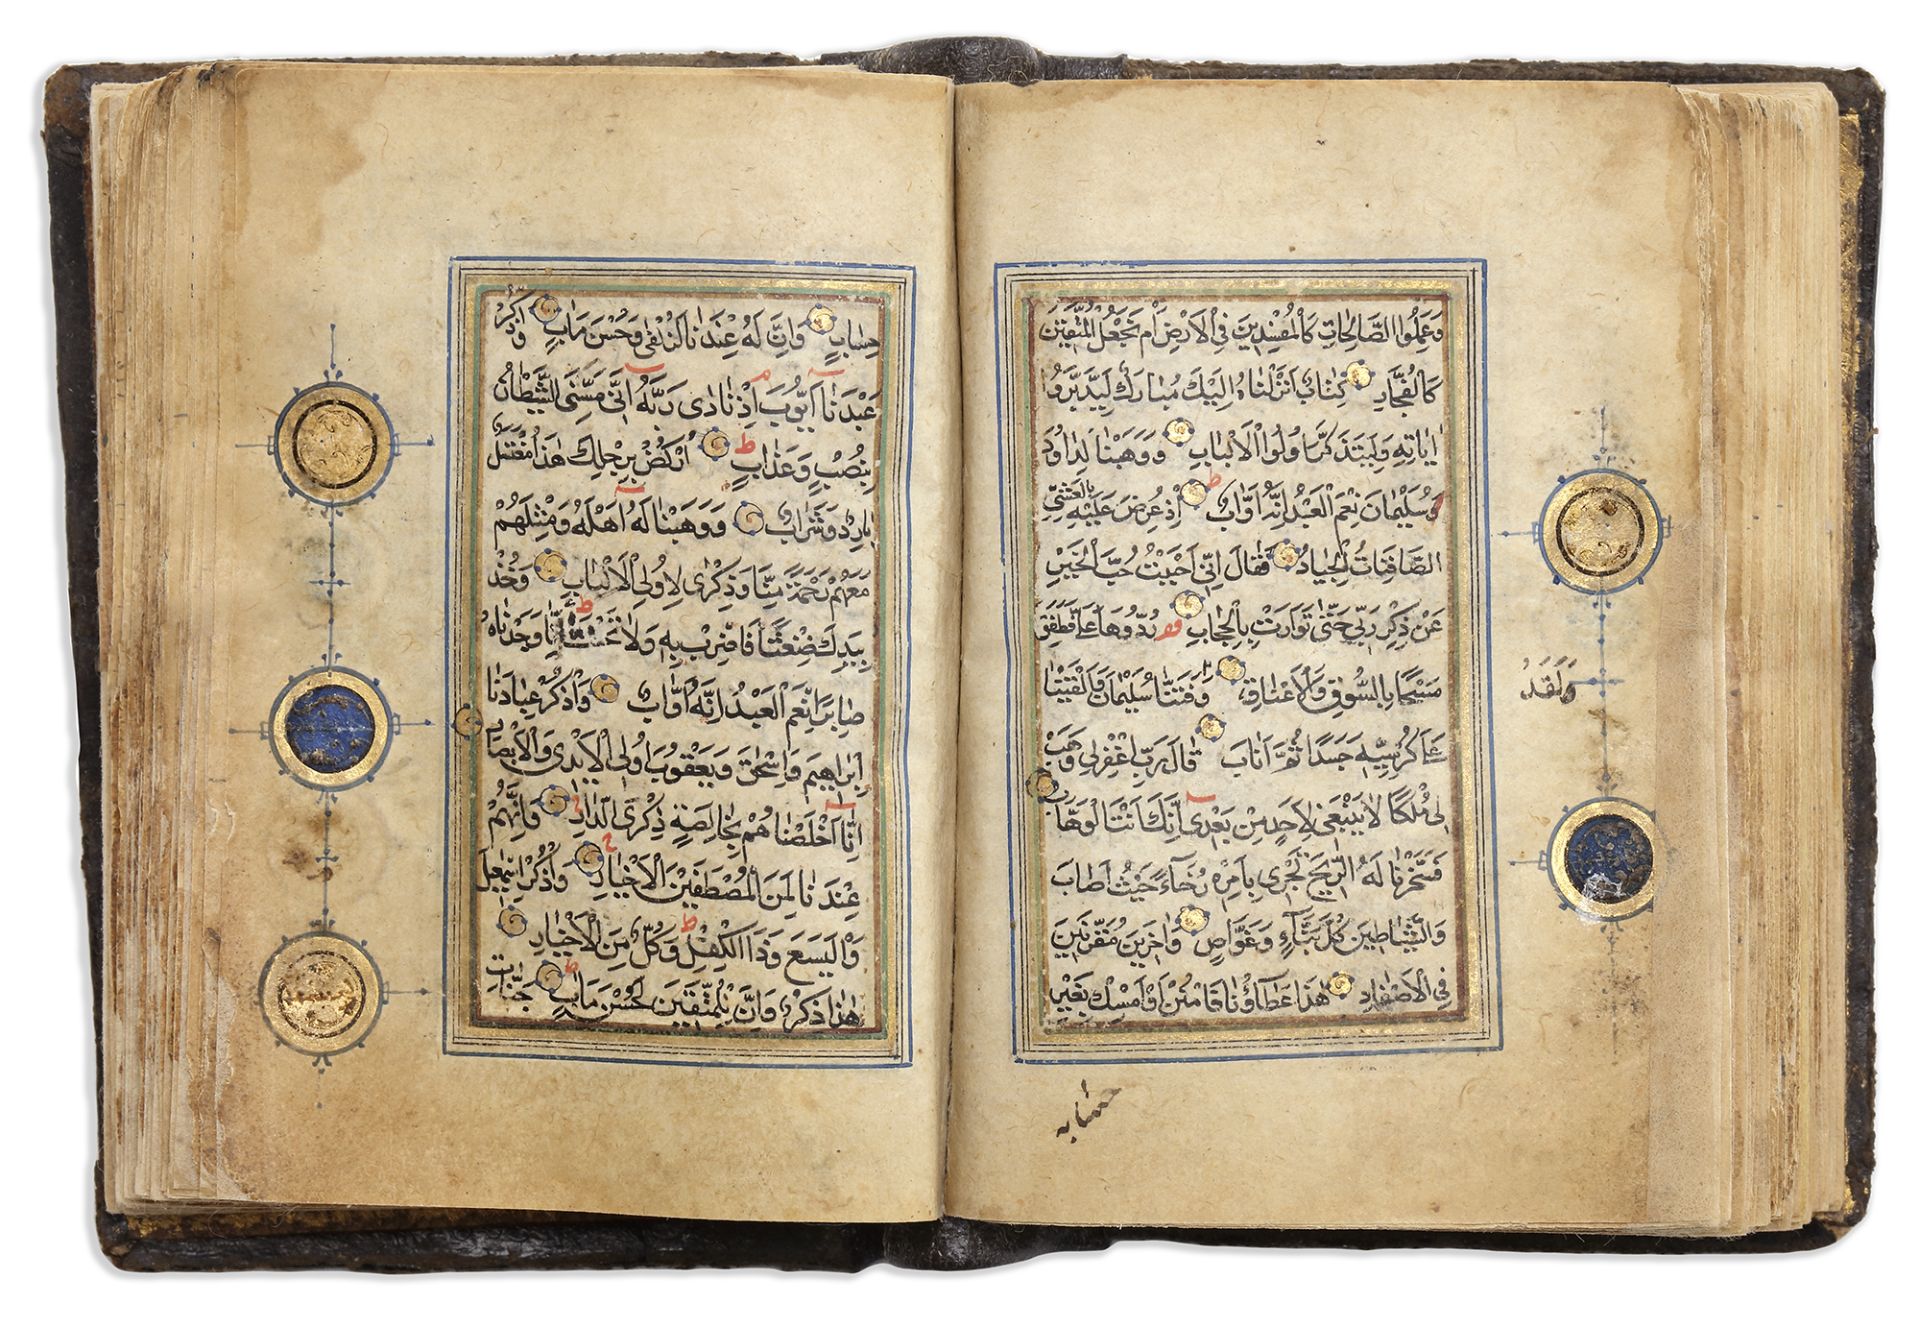 AN OTTOMAN MINIATURE QURAN COPIED BY MAHMOUD SULTANI IN 846 AH/1442 AD - Image 5 of 8